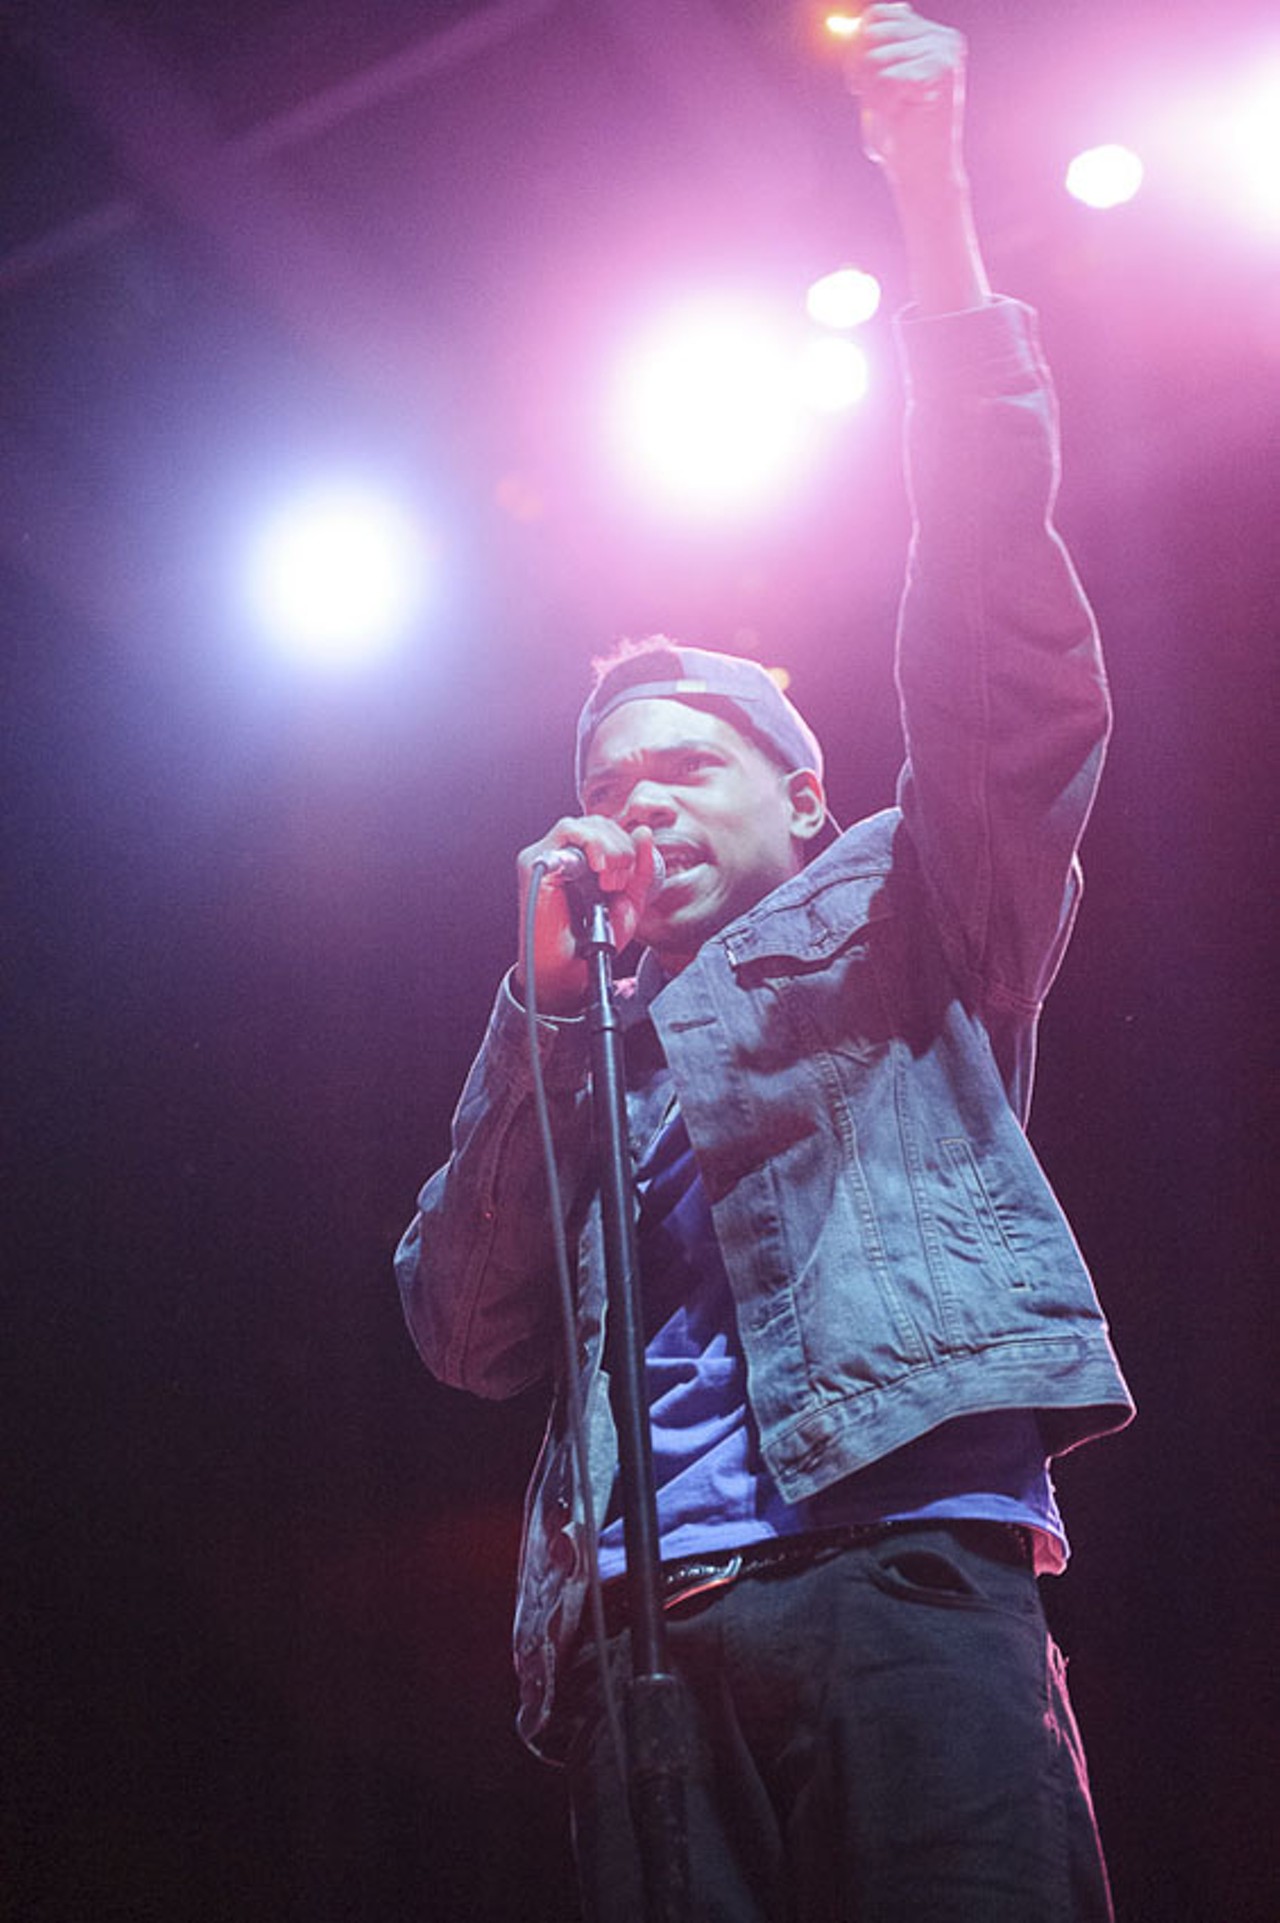 Chance The Rapper opening for Childish Gambino at the Pageant in St. Louis on June 7, 2012.